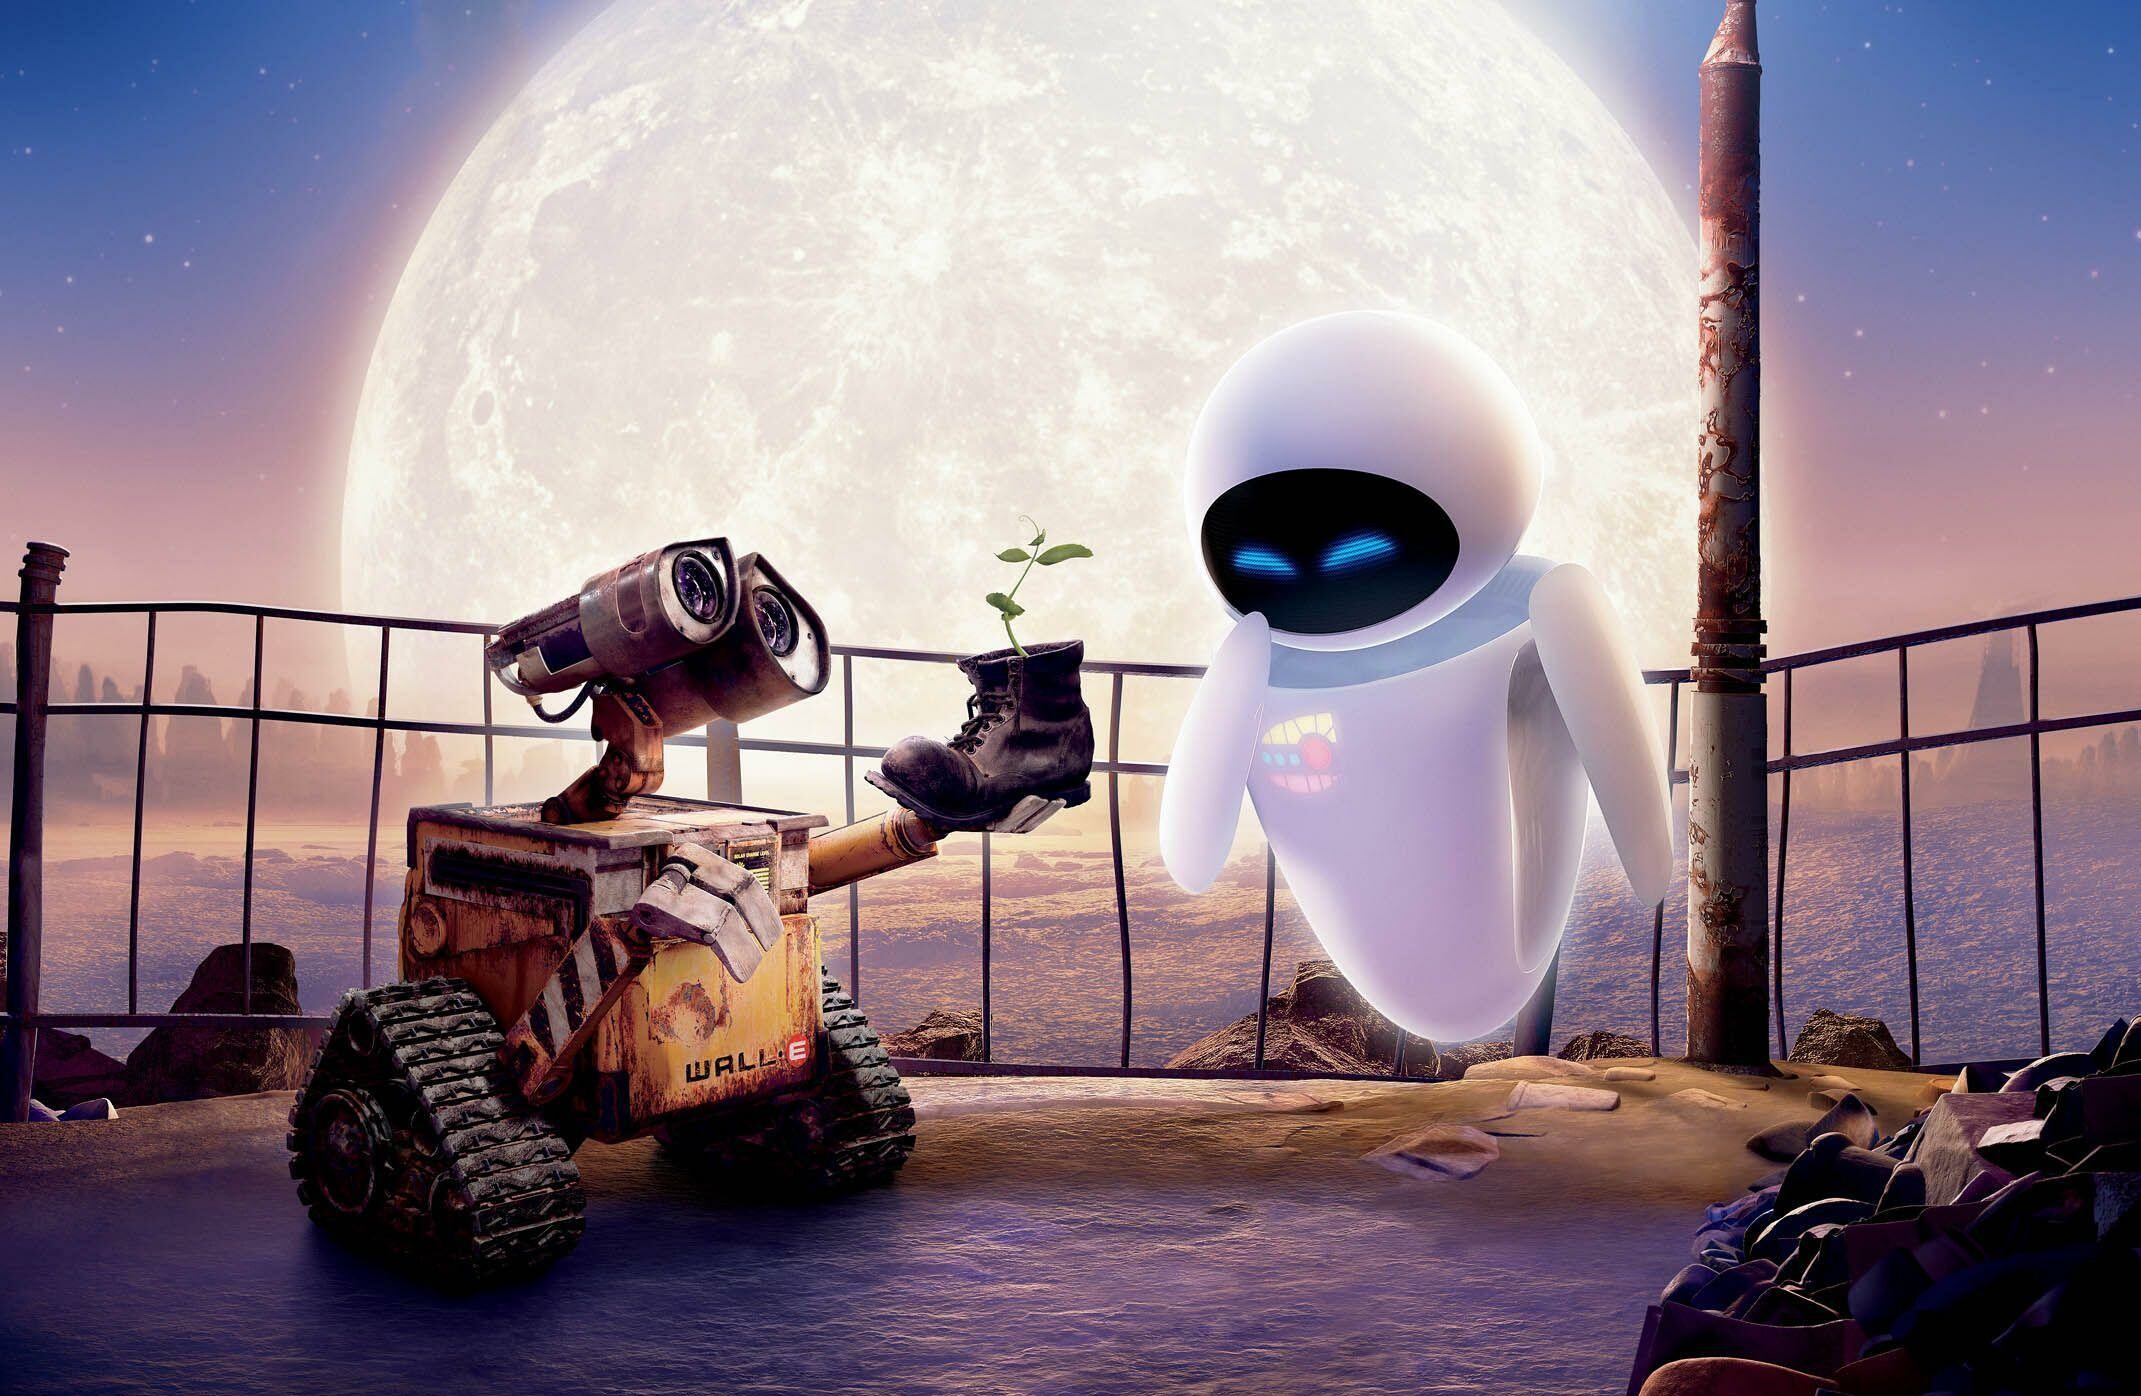 WALL·E: The last robot left on Earth, programmed to clean up the planet, one trash cube at a time. 2150x1400 HD Wallpaper.